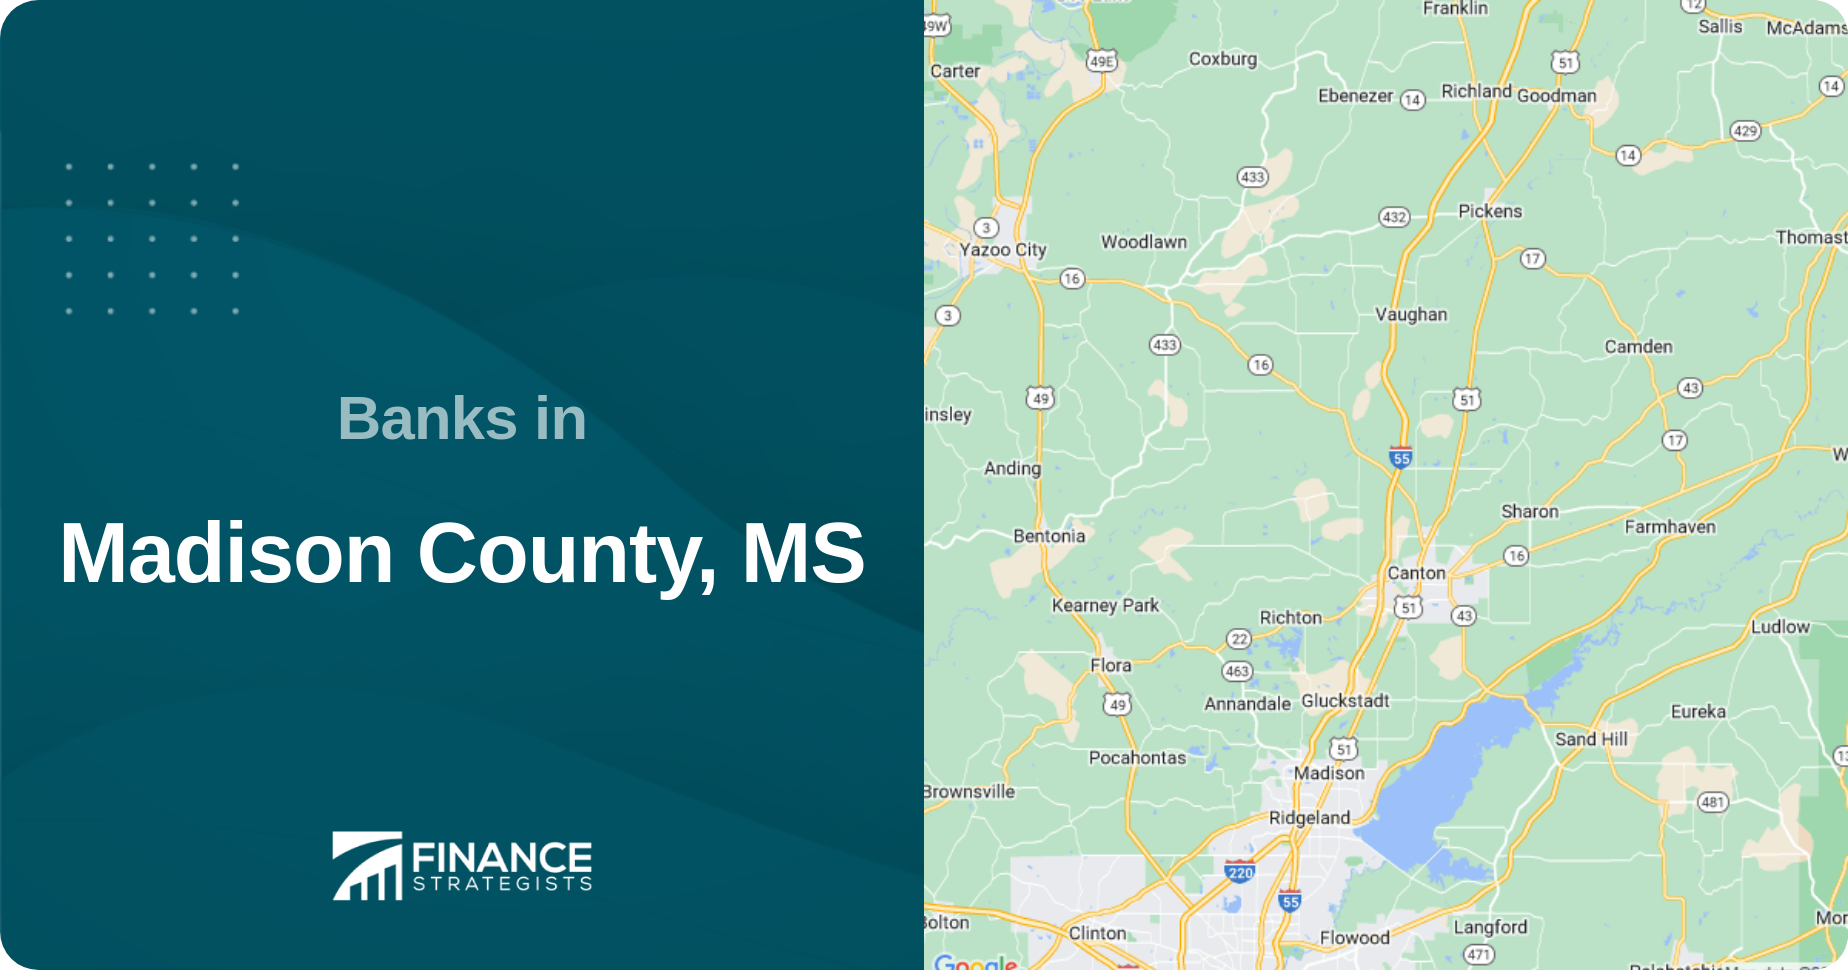 Banks in Madison County, MS